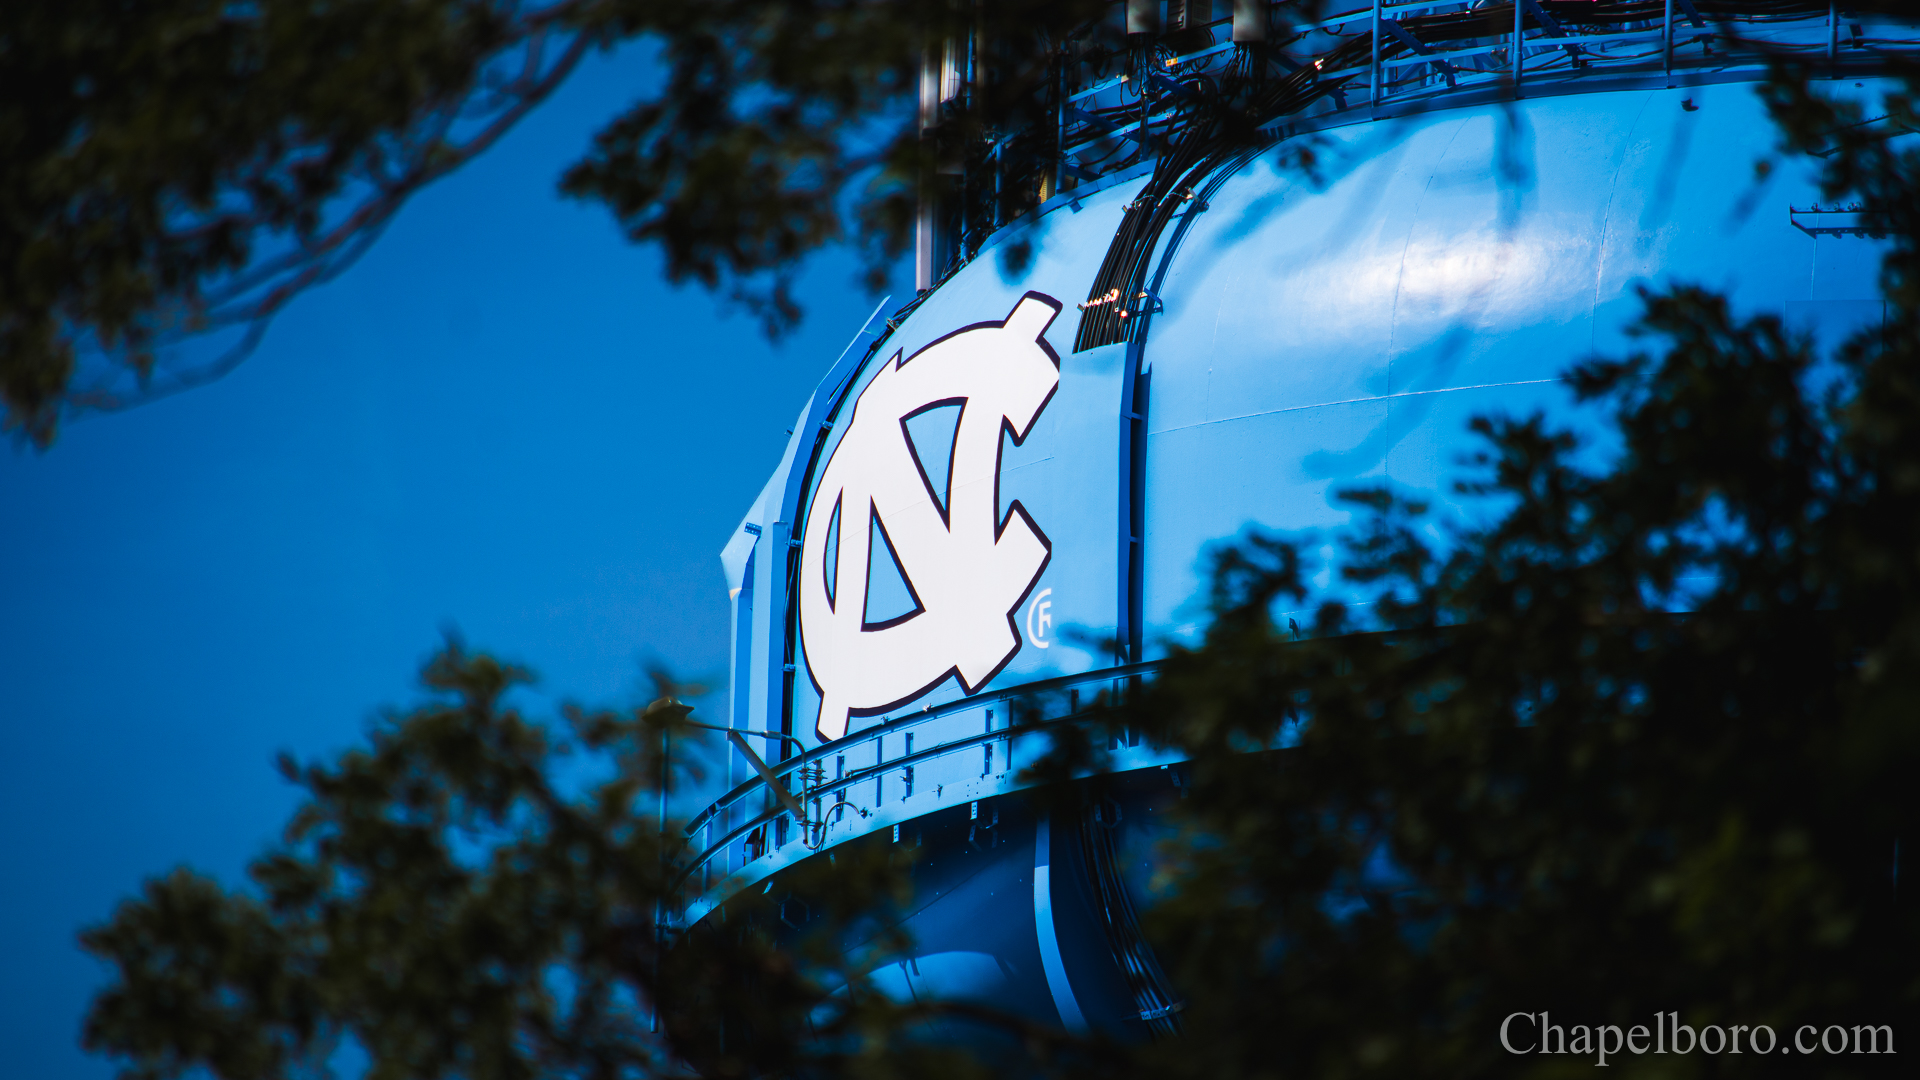 Need a New Zoom Background? Here Are Some UNC Options - Chapelboro.com